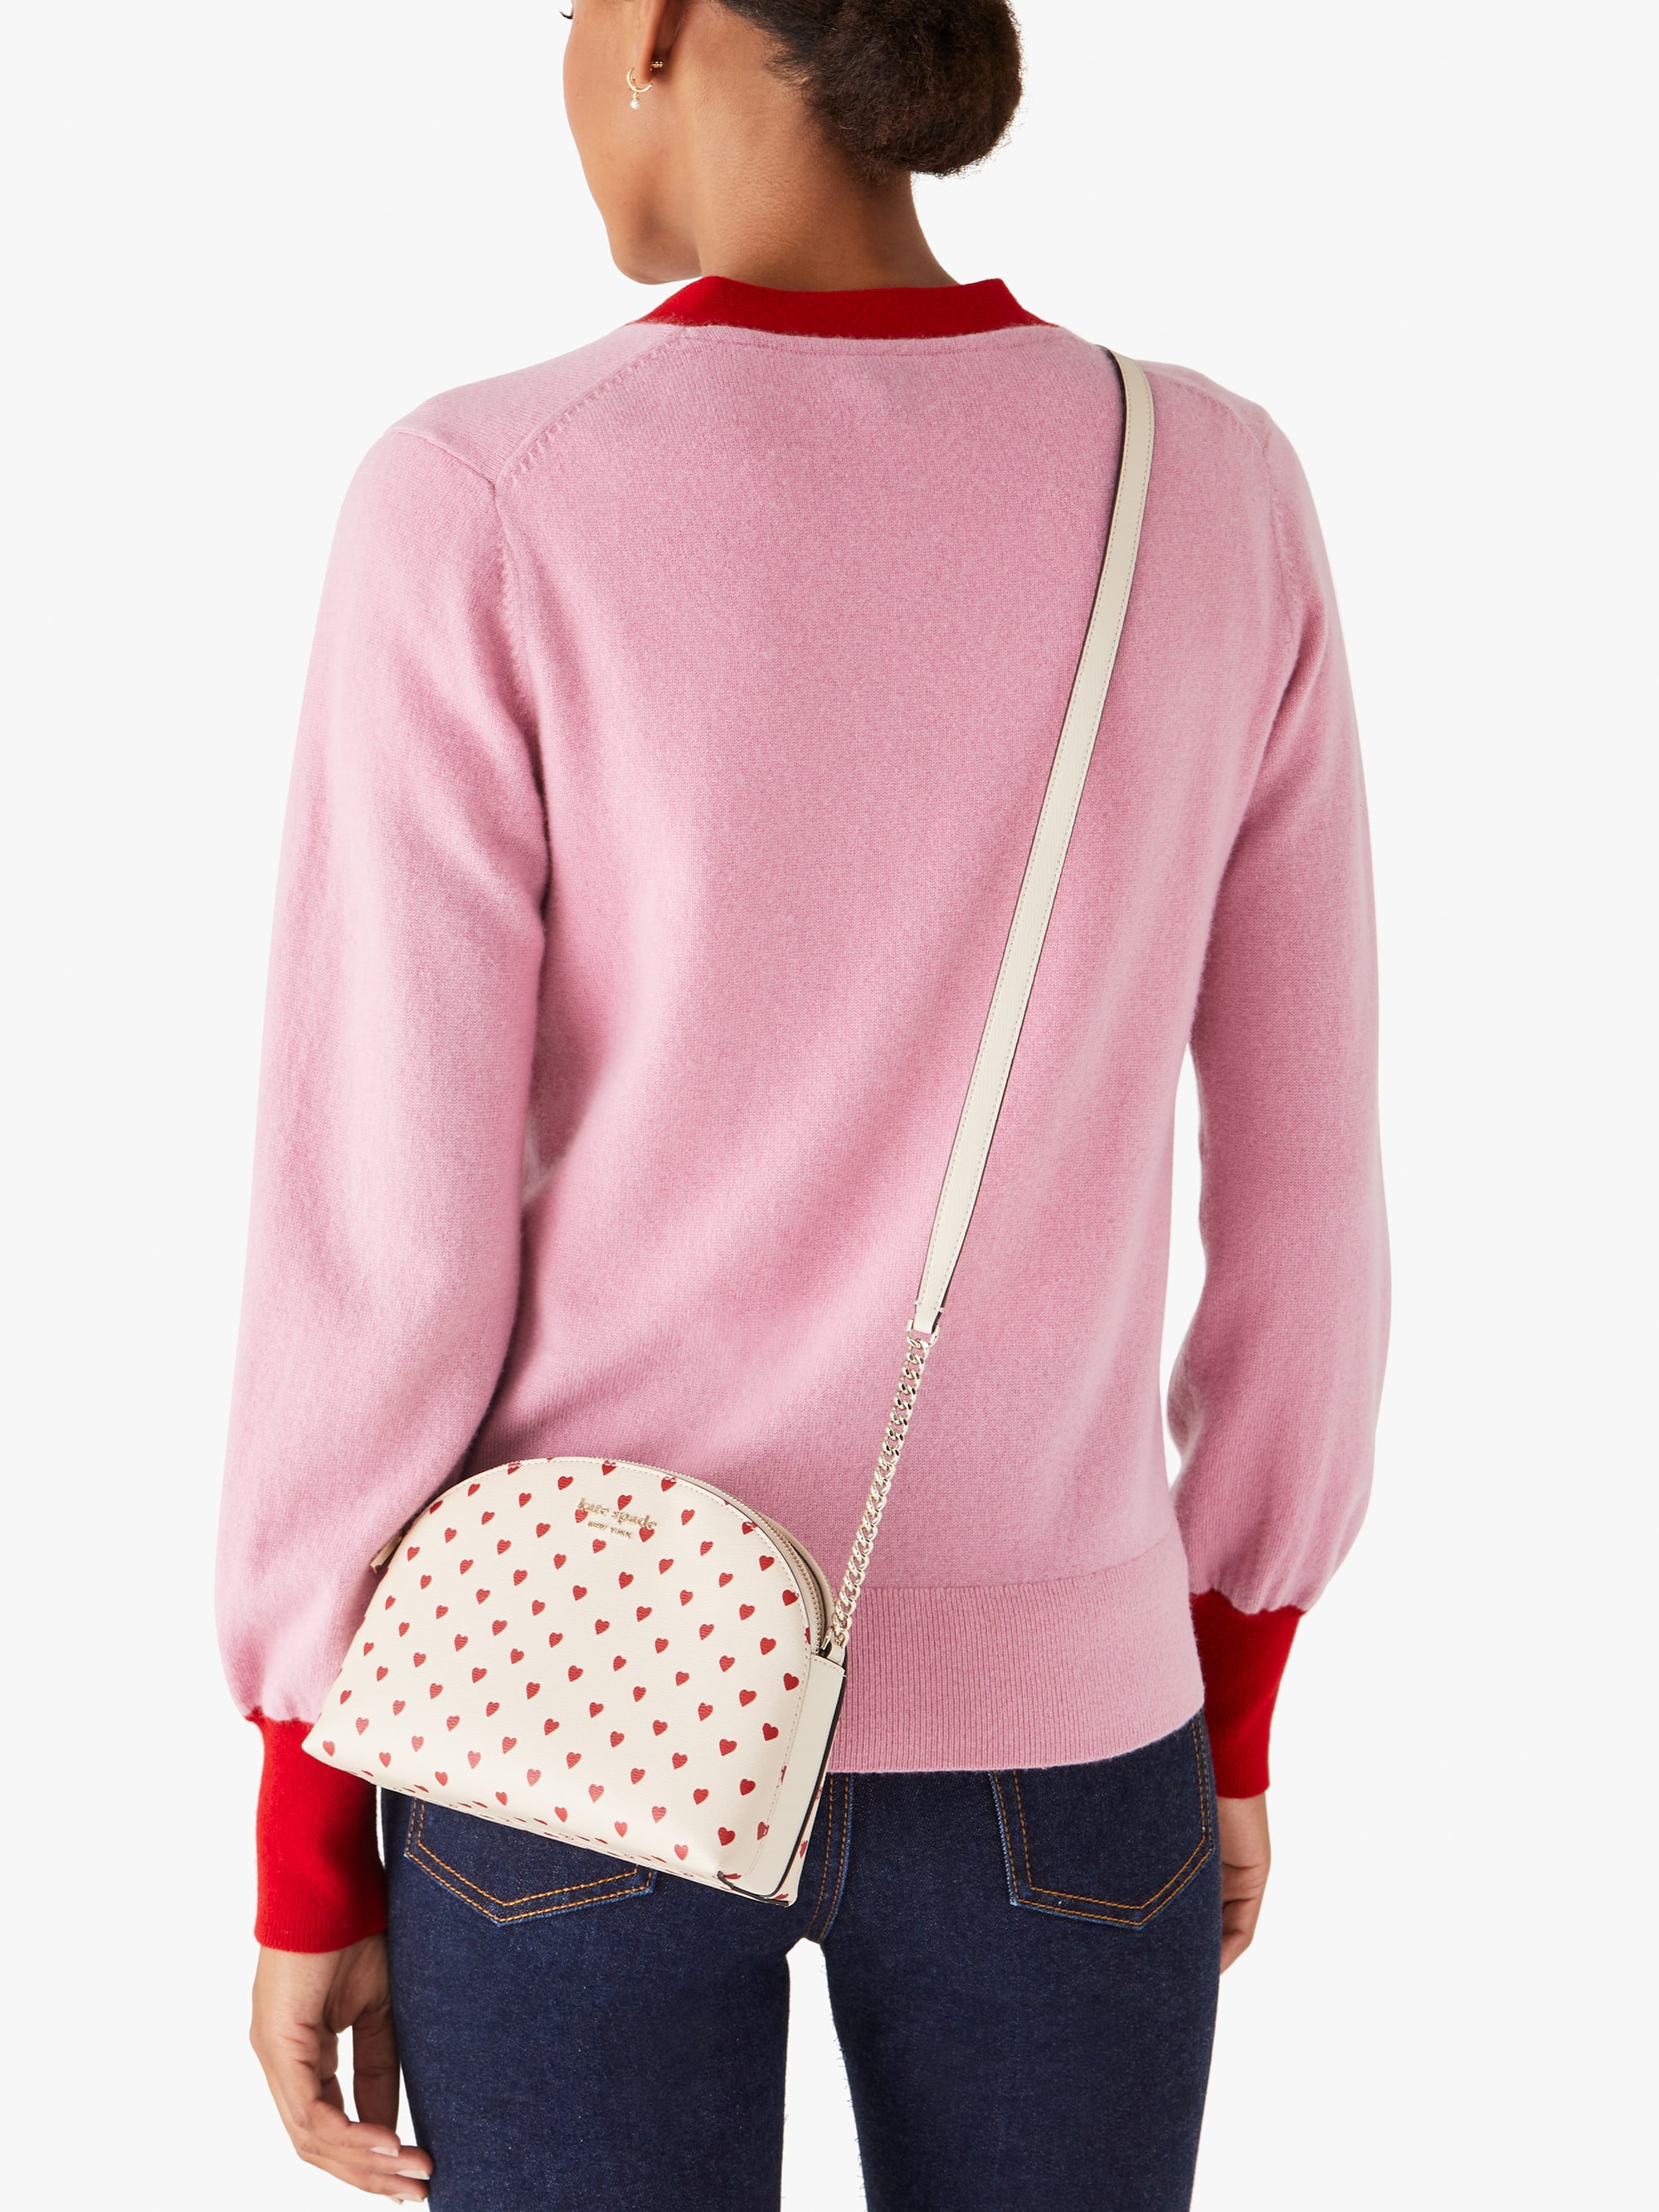 Spencer Hearts Double-Zip Dome Crossbody | Kate Spade NY Just Launched a  Perfect Valentine's Day Collection | POPSUGAR Fashion Photo 16